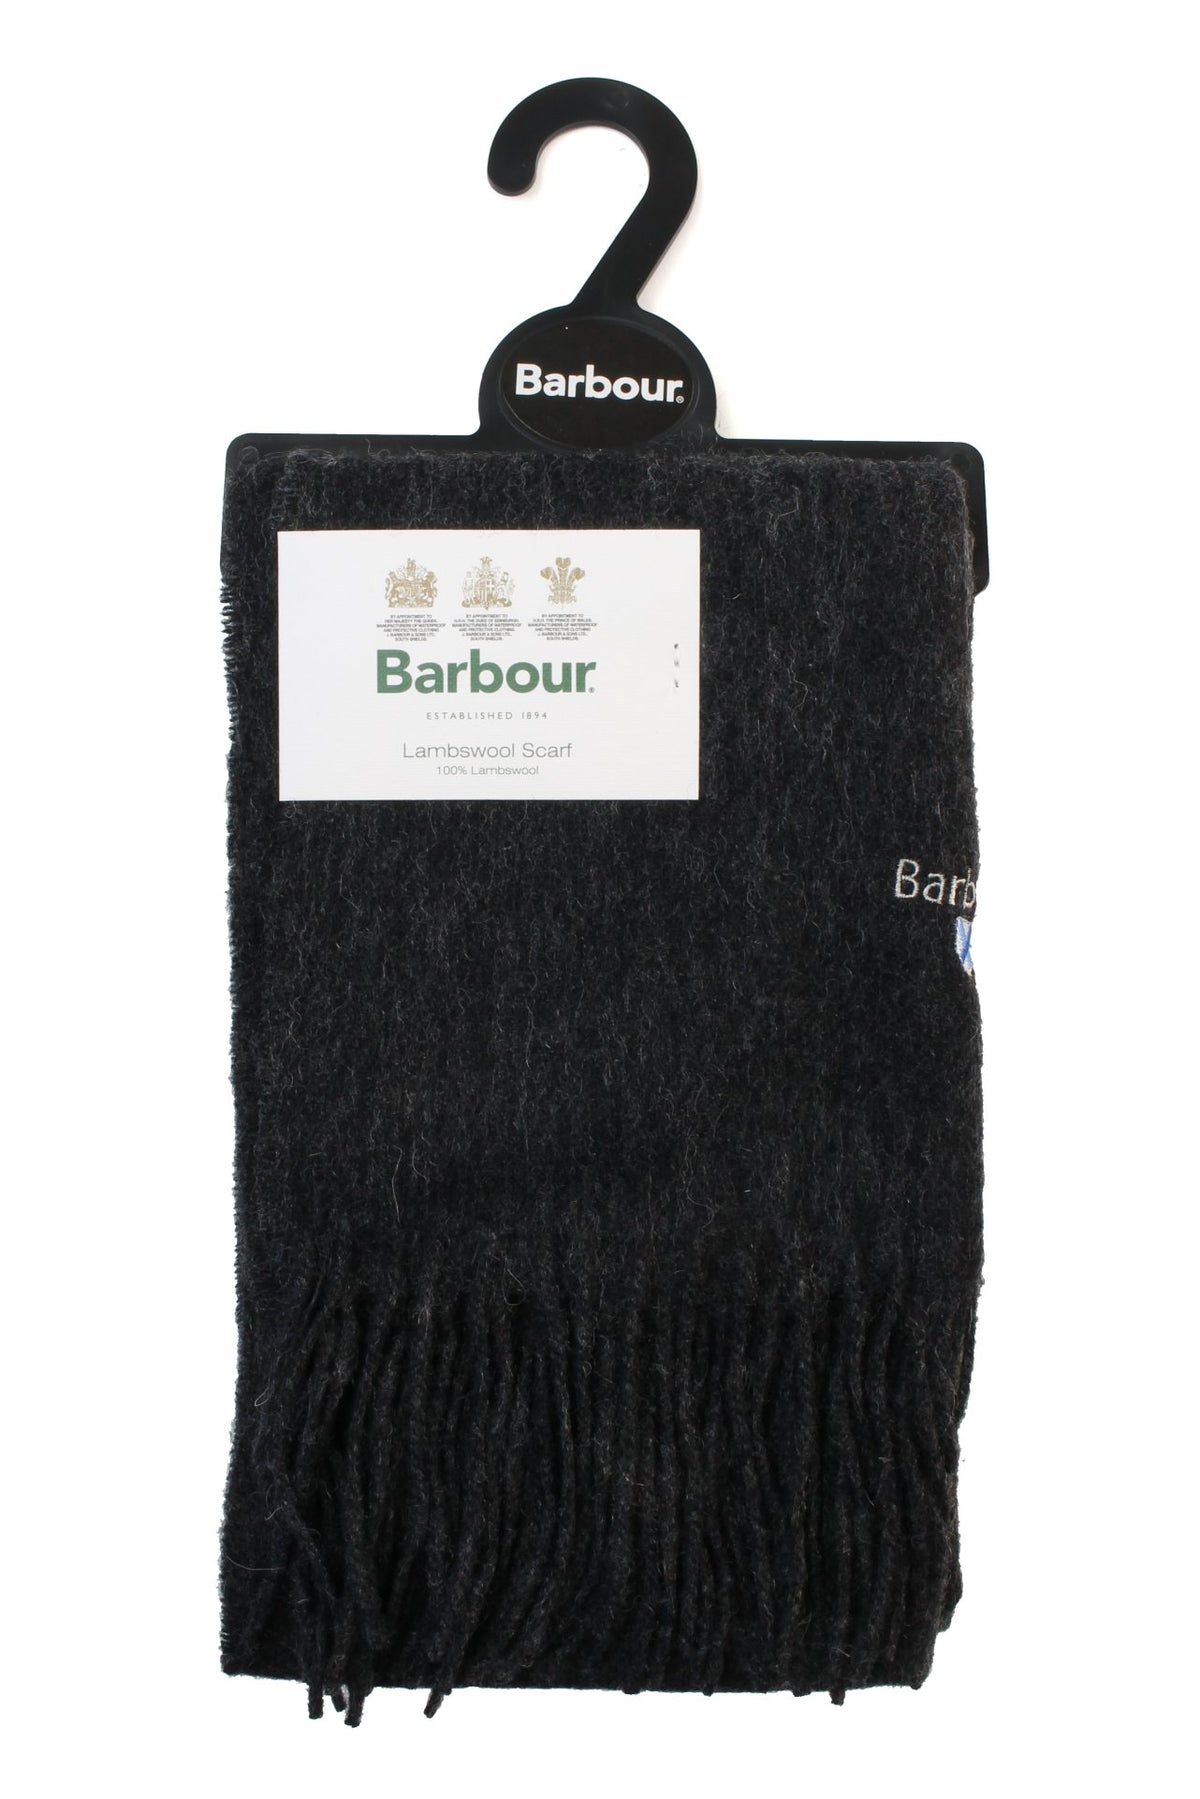 Barbour Plain Lambswool Scarf, 01, Usc0008, Charcoal/Grey